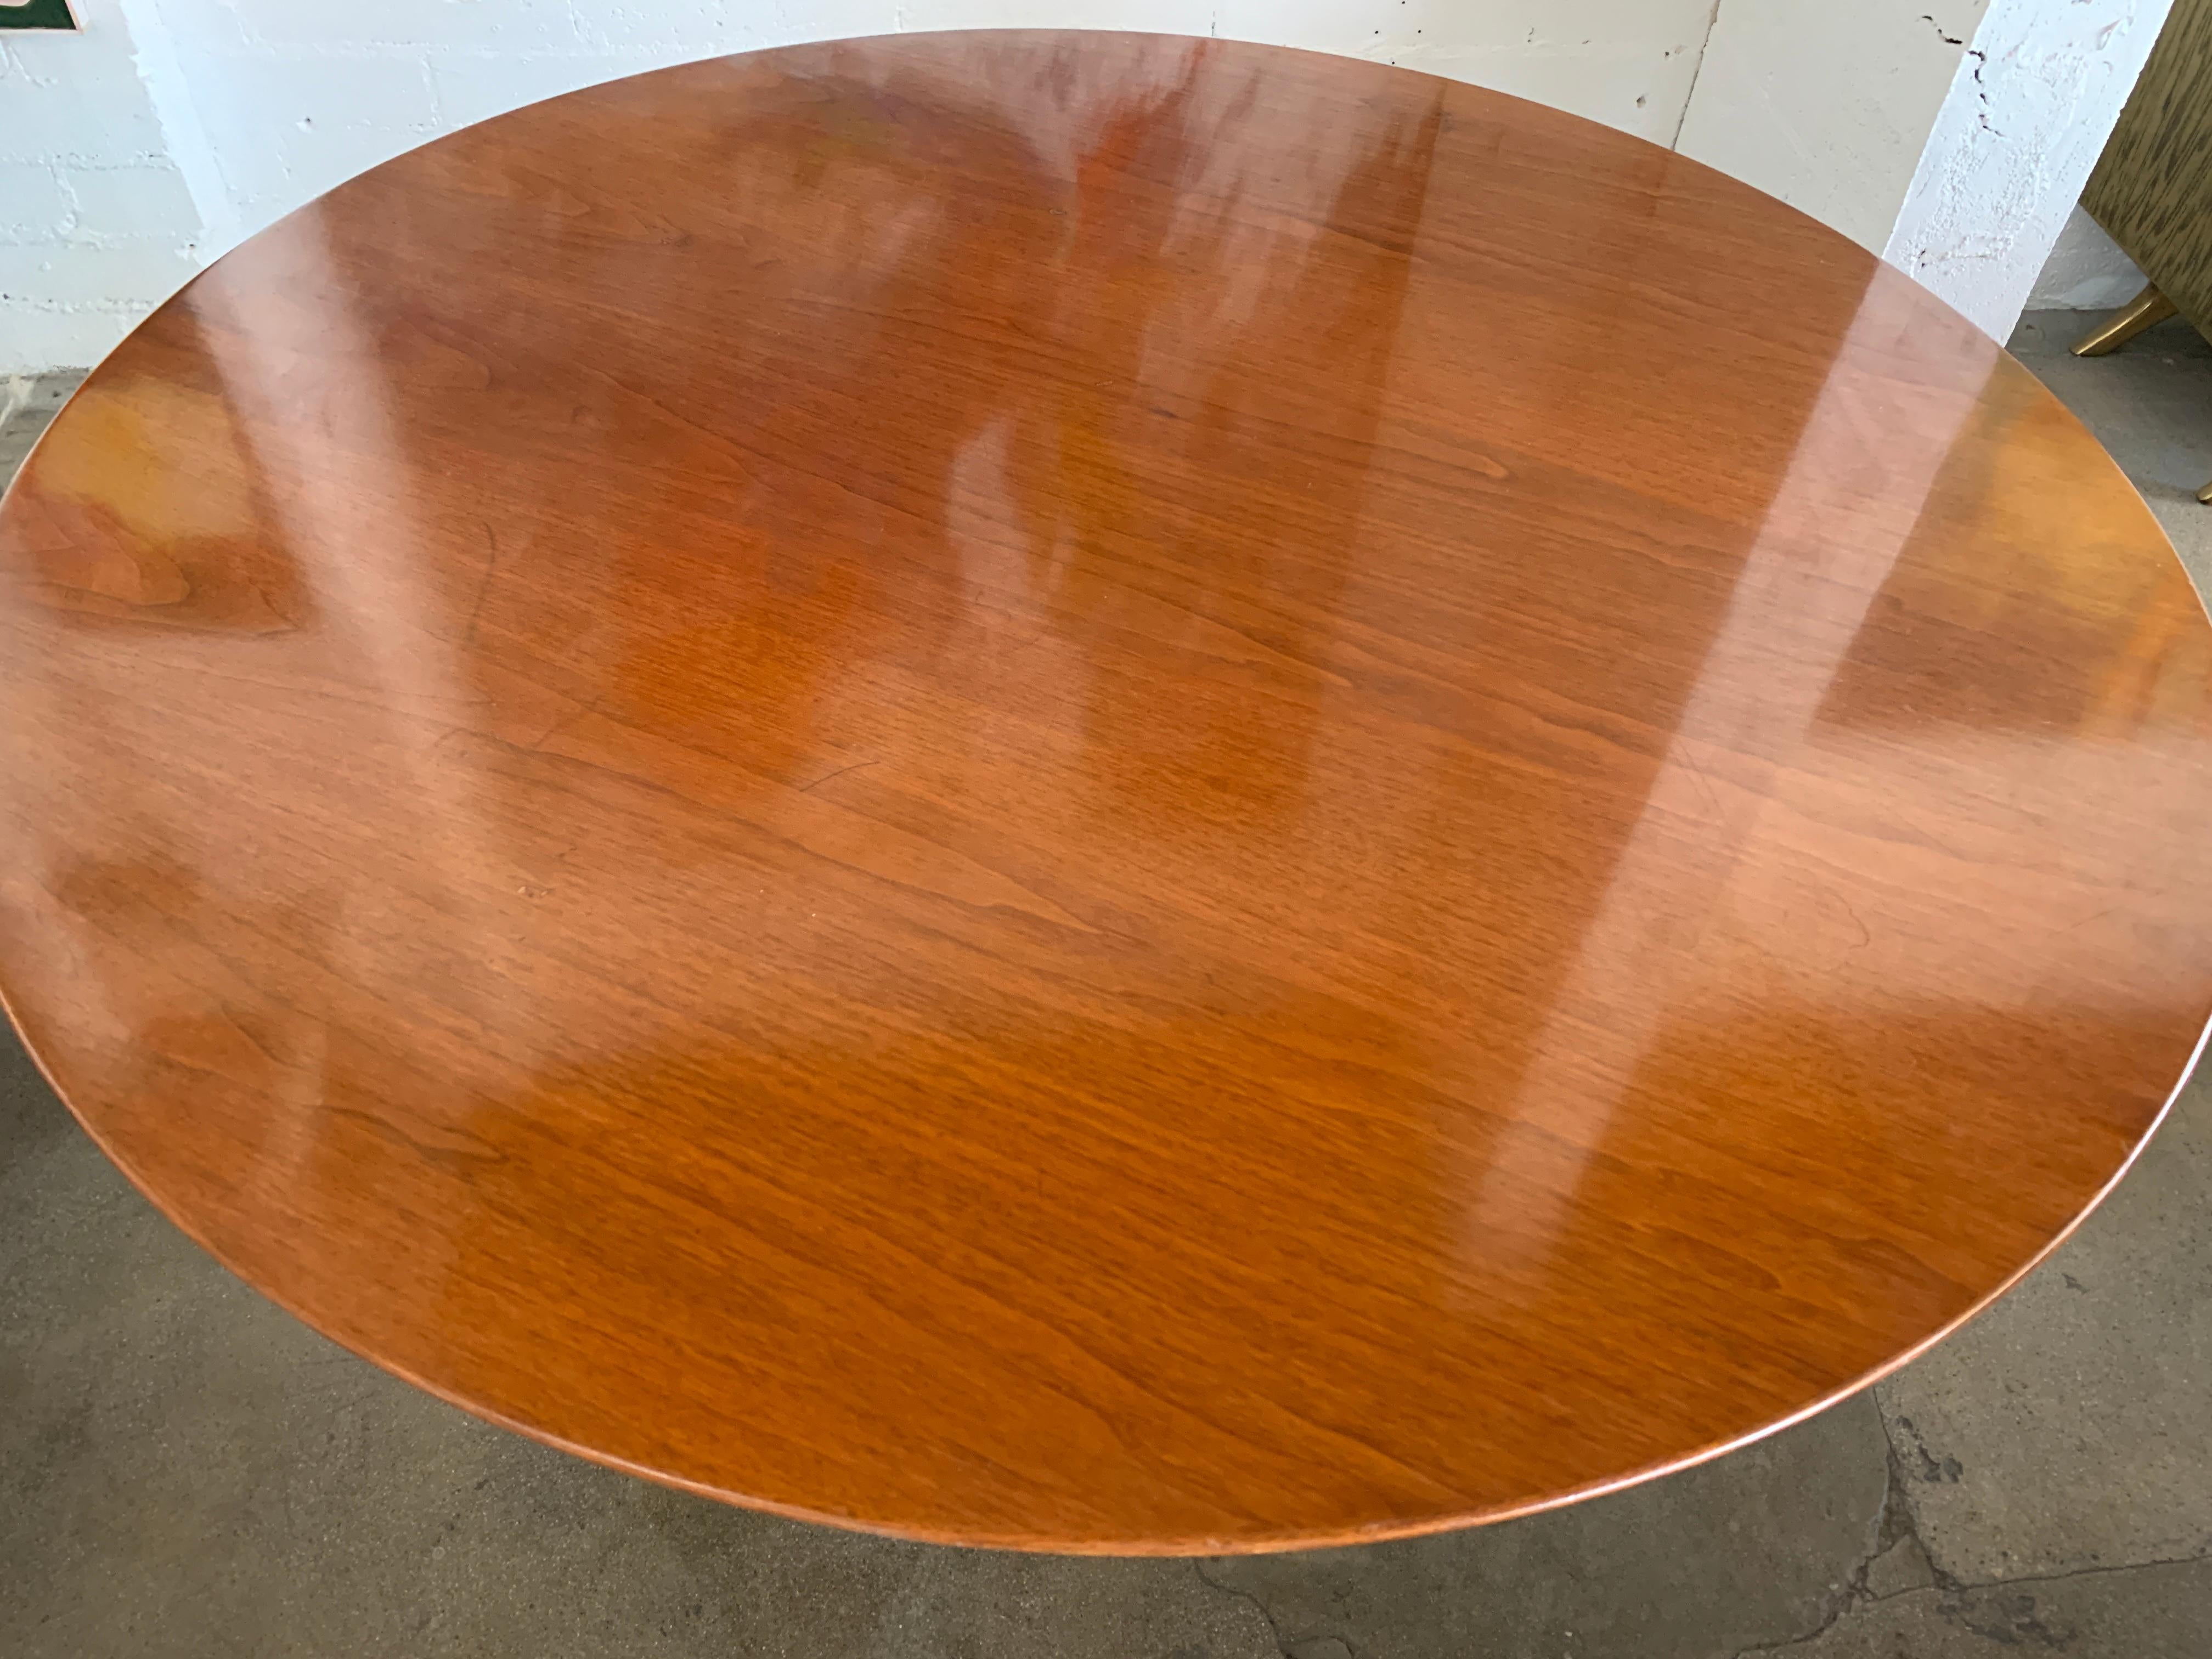 A vintage knoll Saarinen tulip table with a walnut top. It bears a vintage Knoll label that dates it to the 1960s as the address reads 320 Park Avenue. It is 54 inches in diameter and 28.25 inches tall. The top is quite lovely with age appropriate